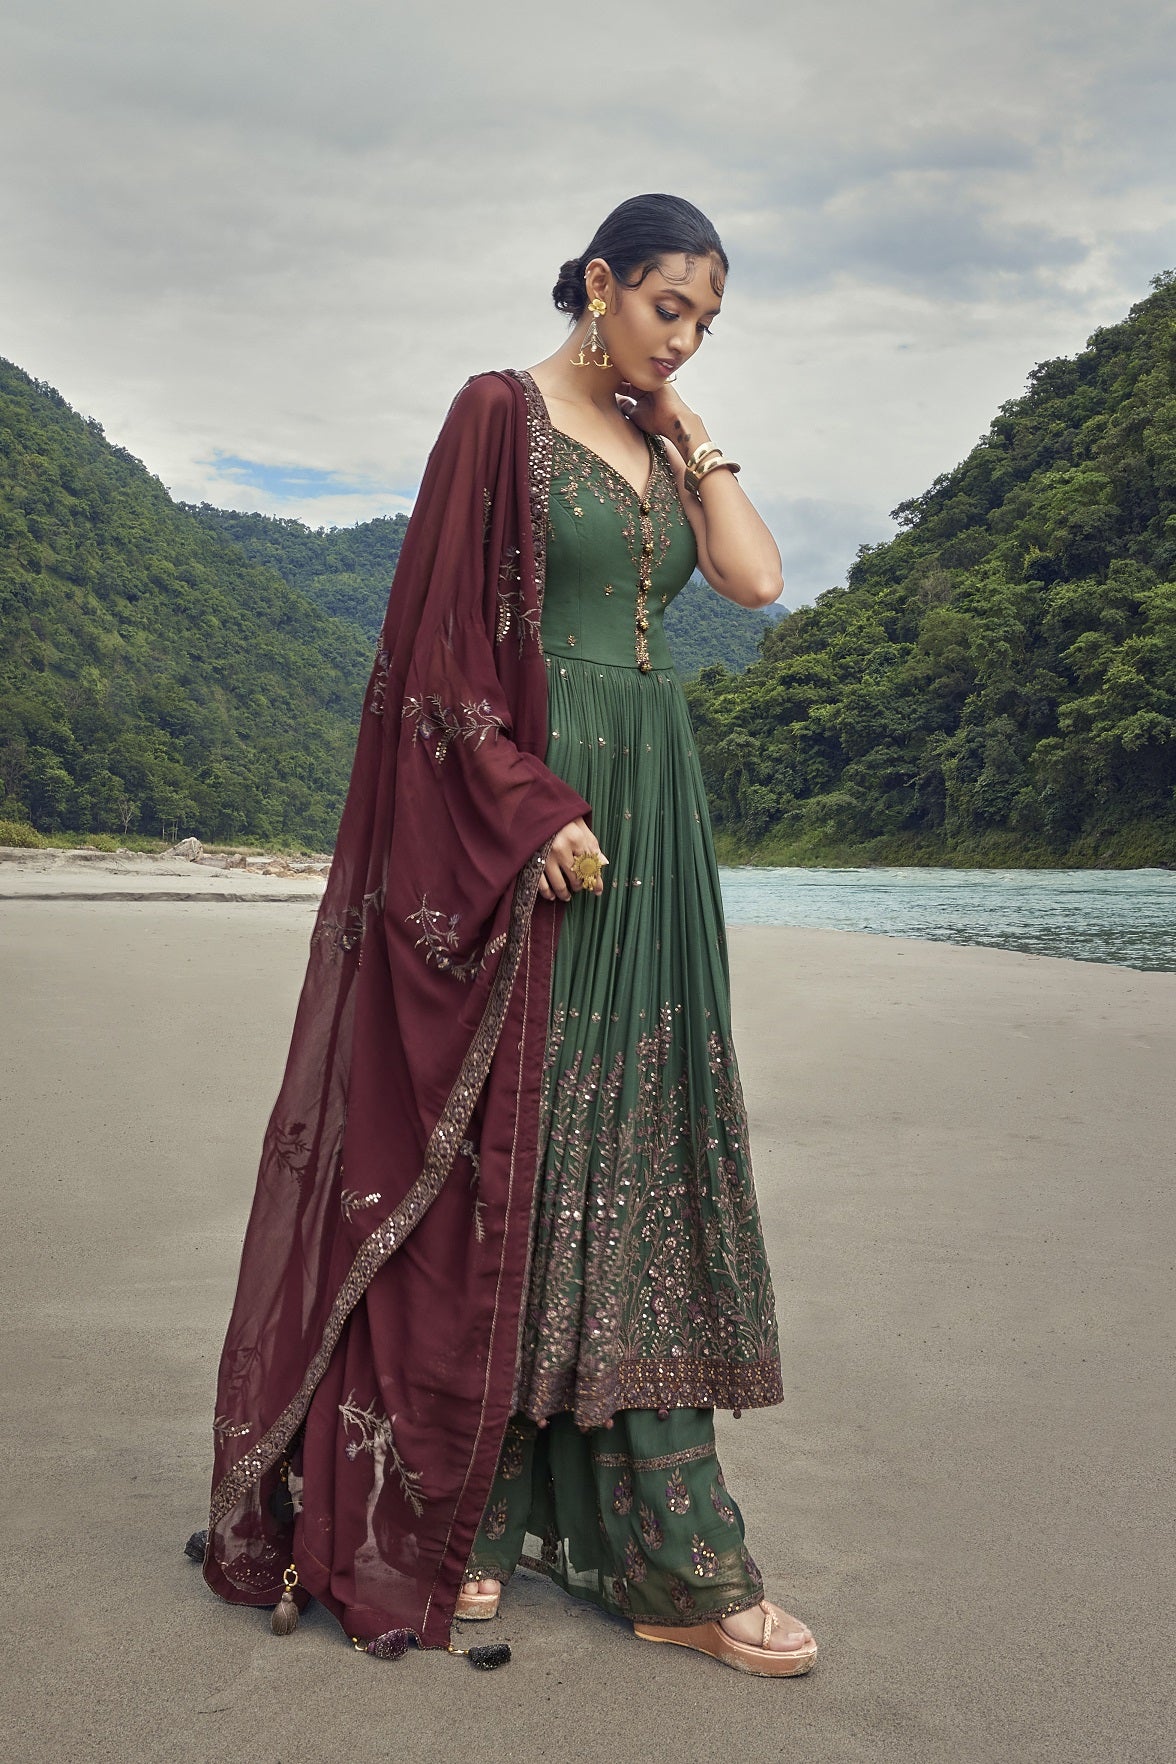 Buy a beautiful green anarkali embroidered georgette sharara suit with a dupatta. The suit is perfect for occasions like mehndi and festivals. Shop online from Pure Elegance. online in the USA with a dupatta. Dazzle on weddings and special occasions with exquisite Indian designer dresses, sharara suits, Anarkali suits, and wedding lehengas from Pure Elegance Indian fashion store in the USA.